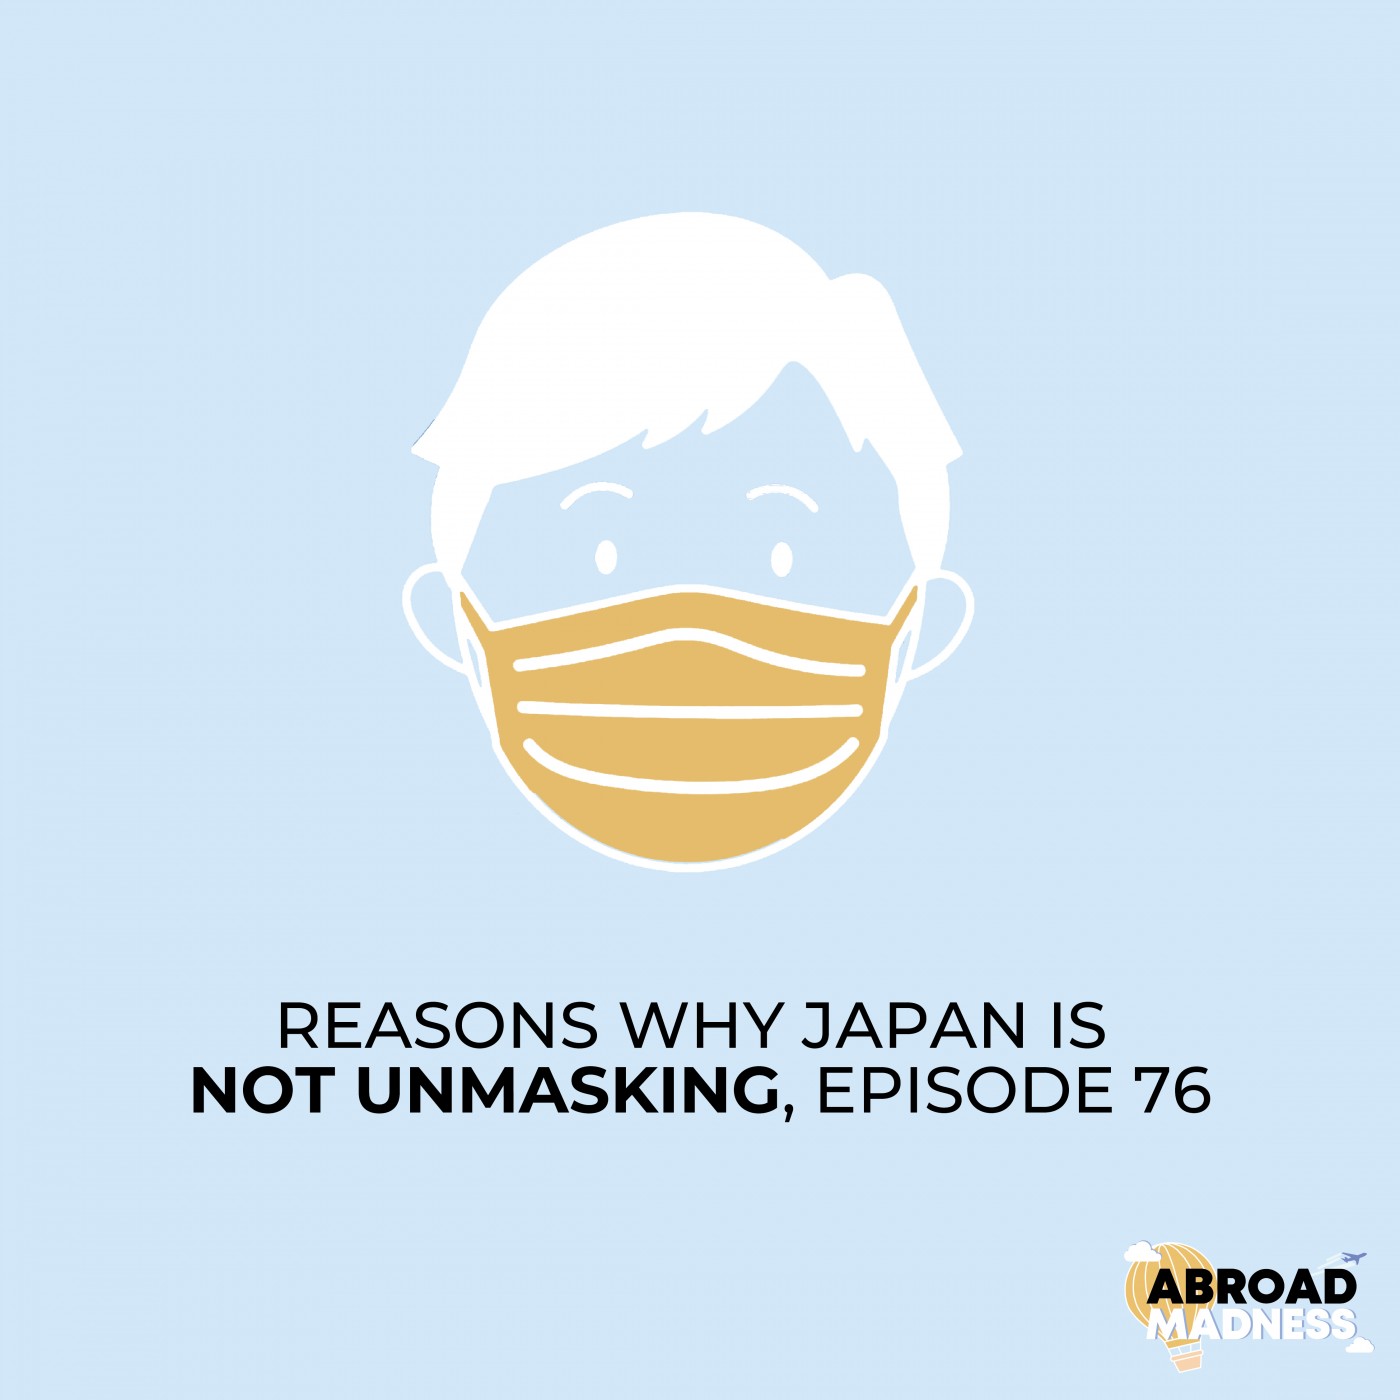 Reasons why Japan is not unmasking, Episode 76